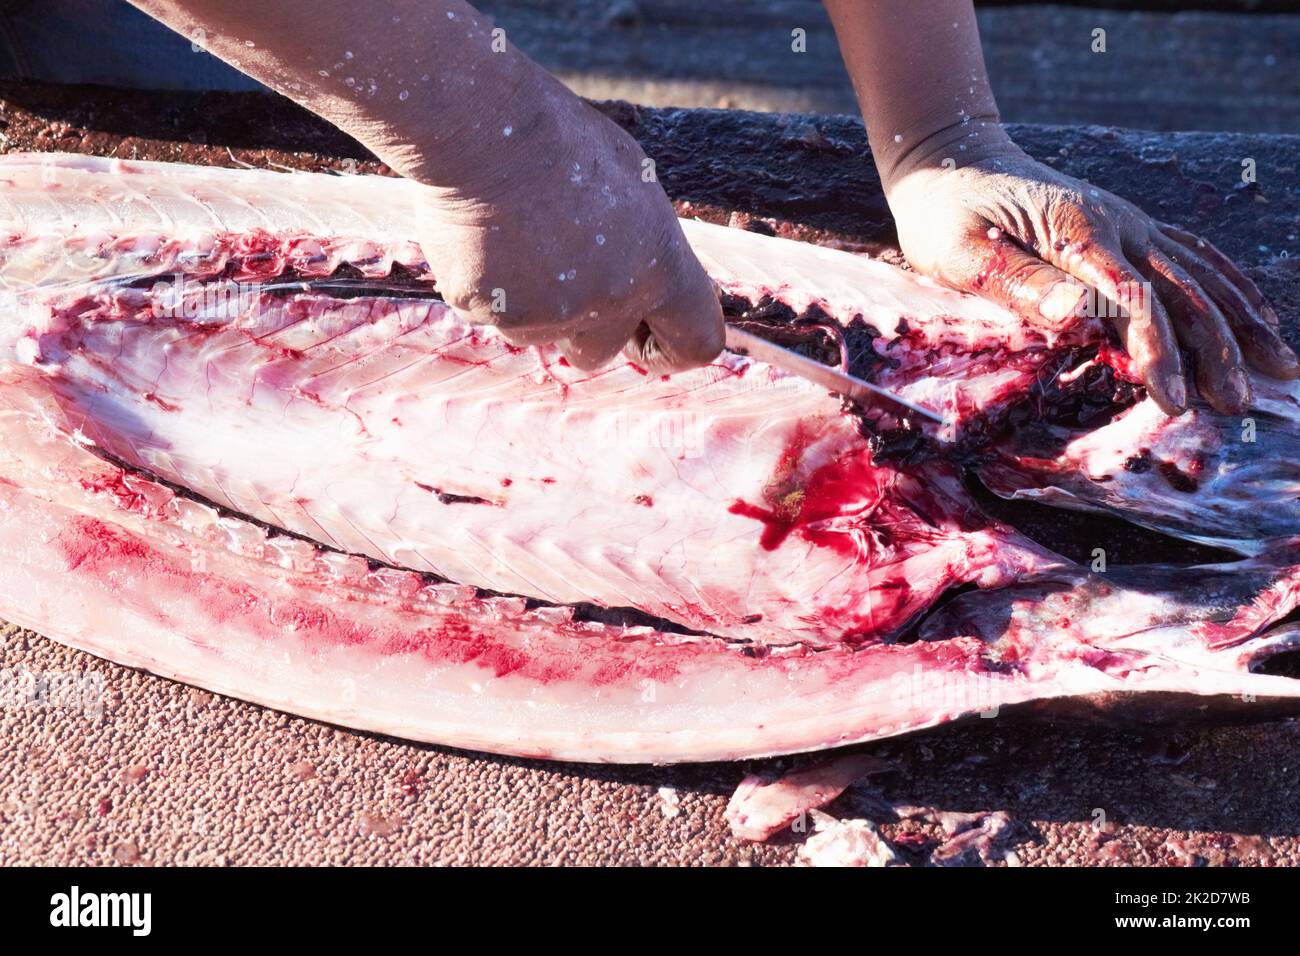 Fillet and flay. Cropped image of a fish being gutted. Stock Photo